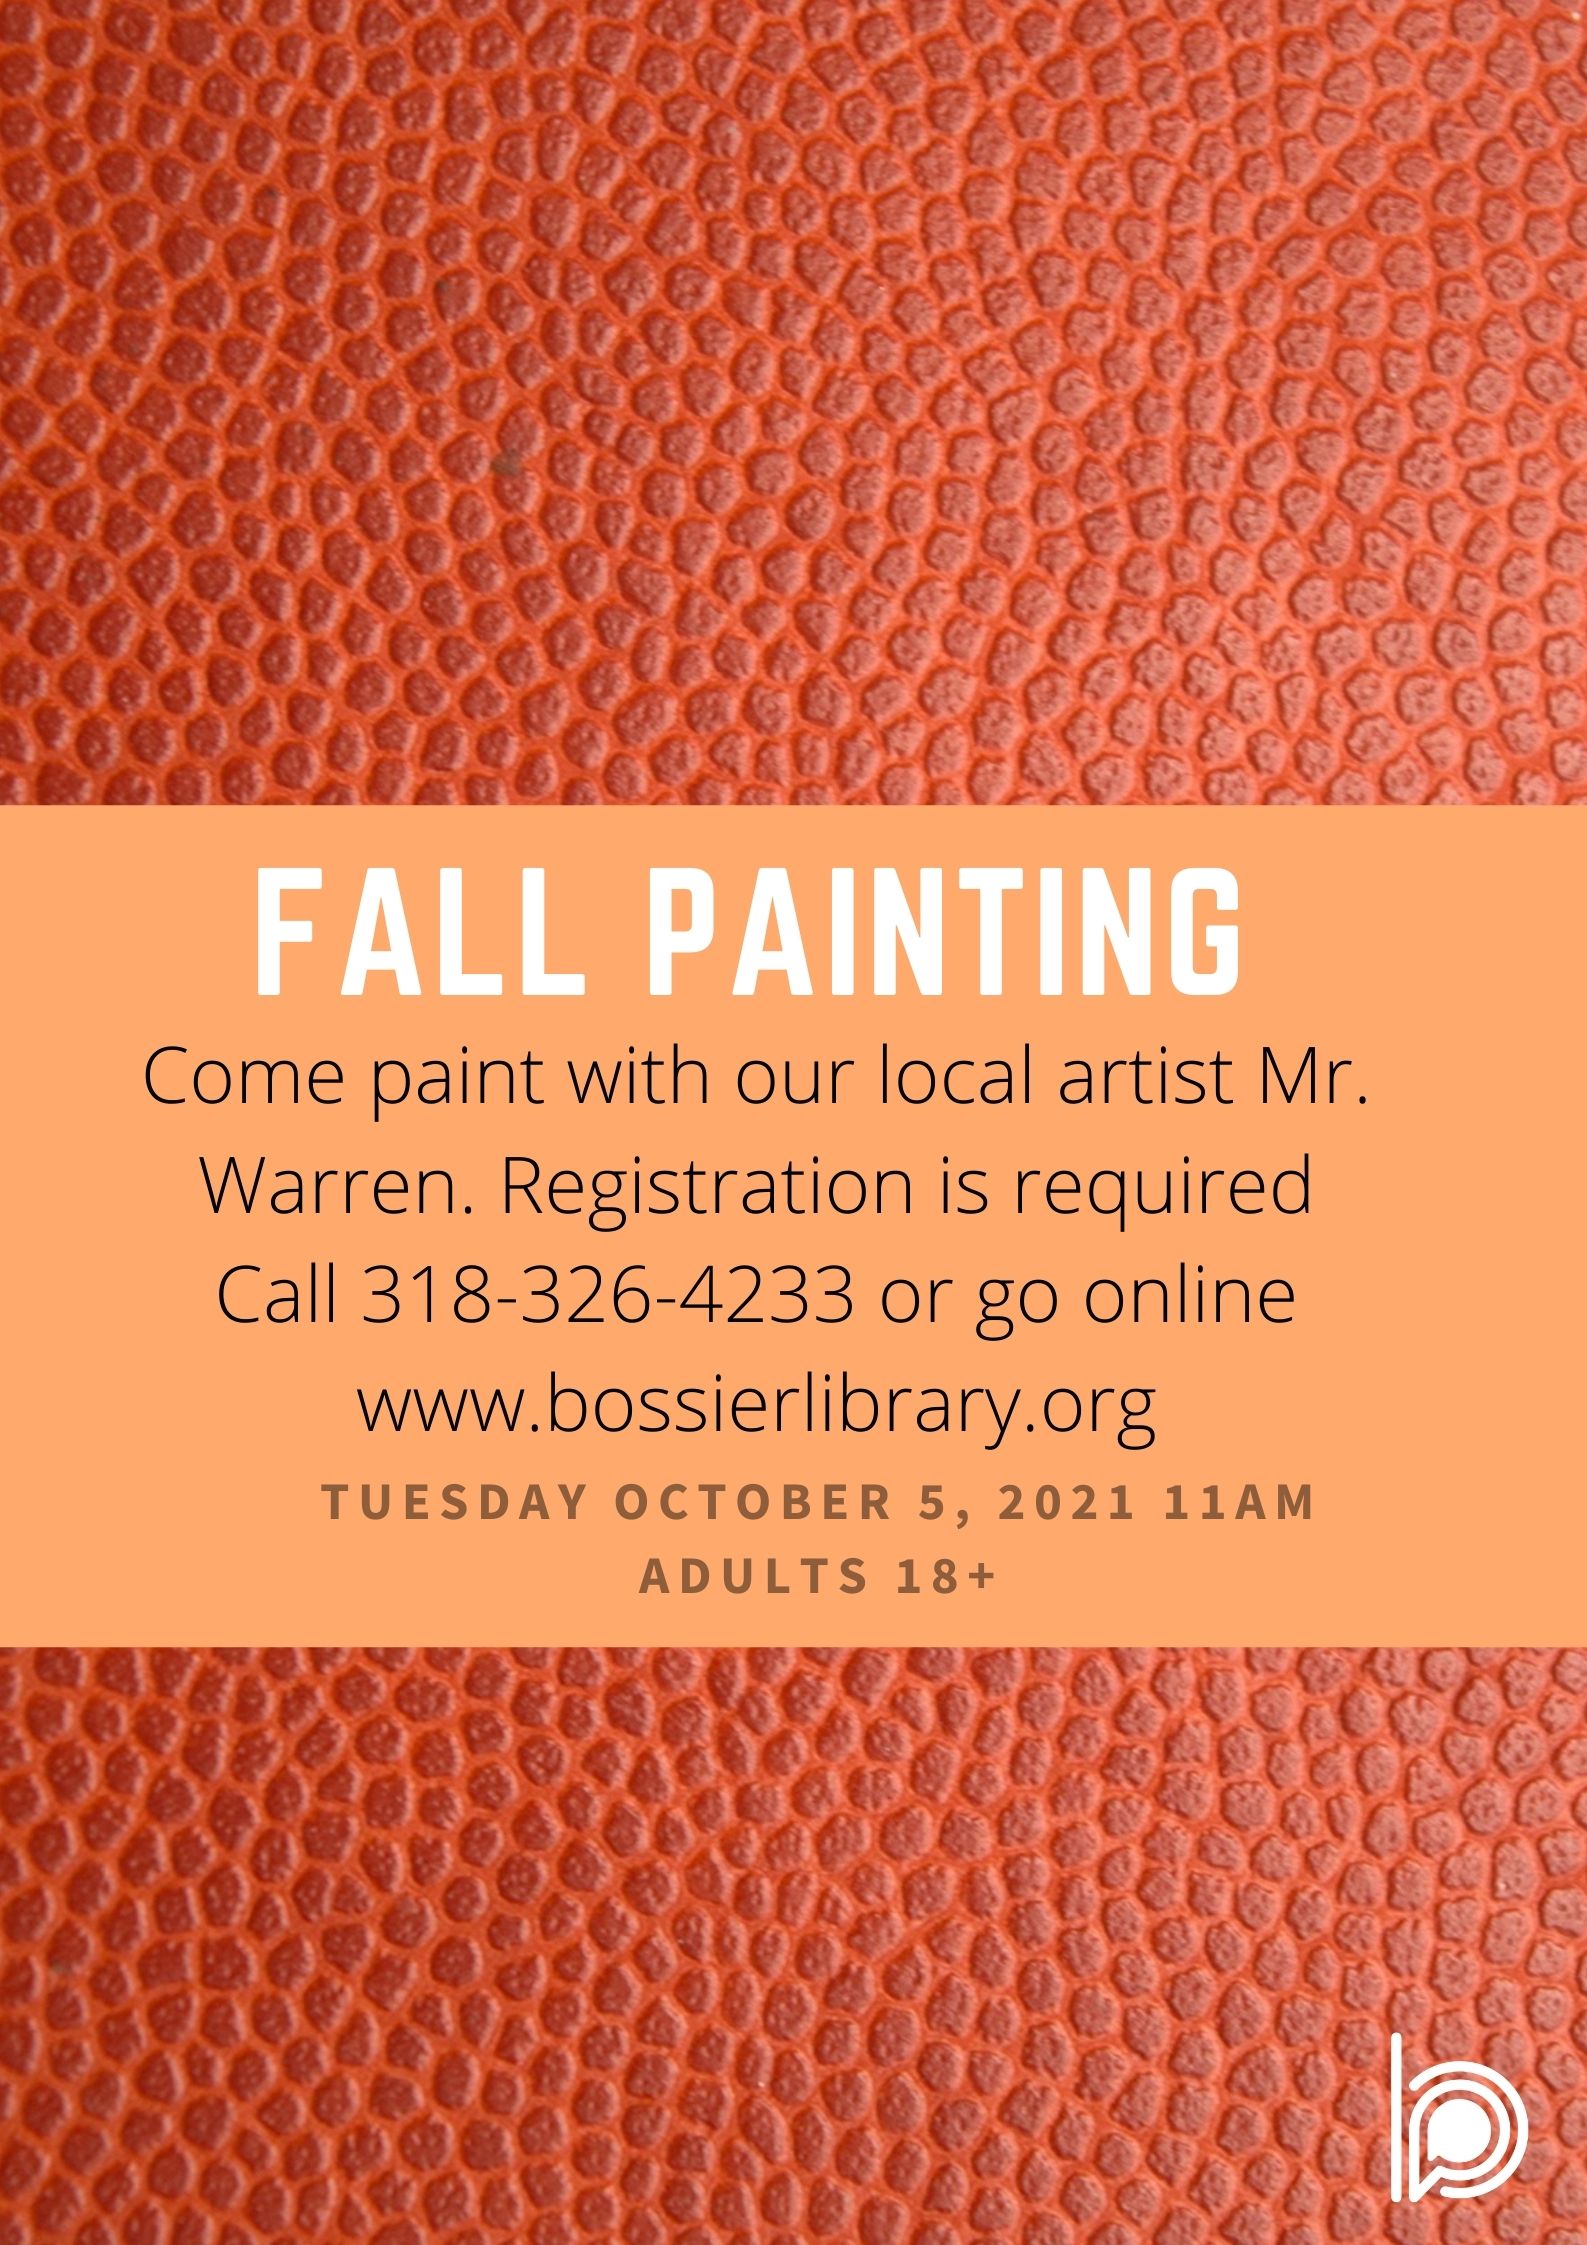 Fall Painting with Mr. Warren